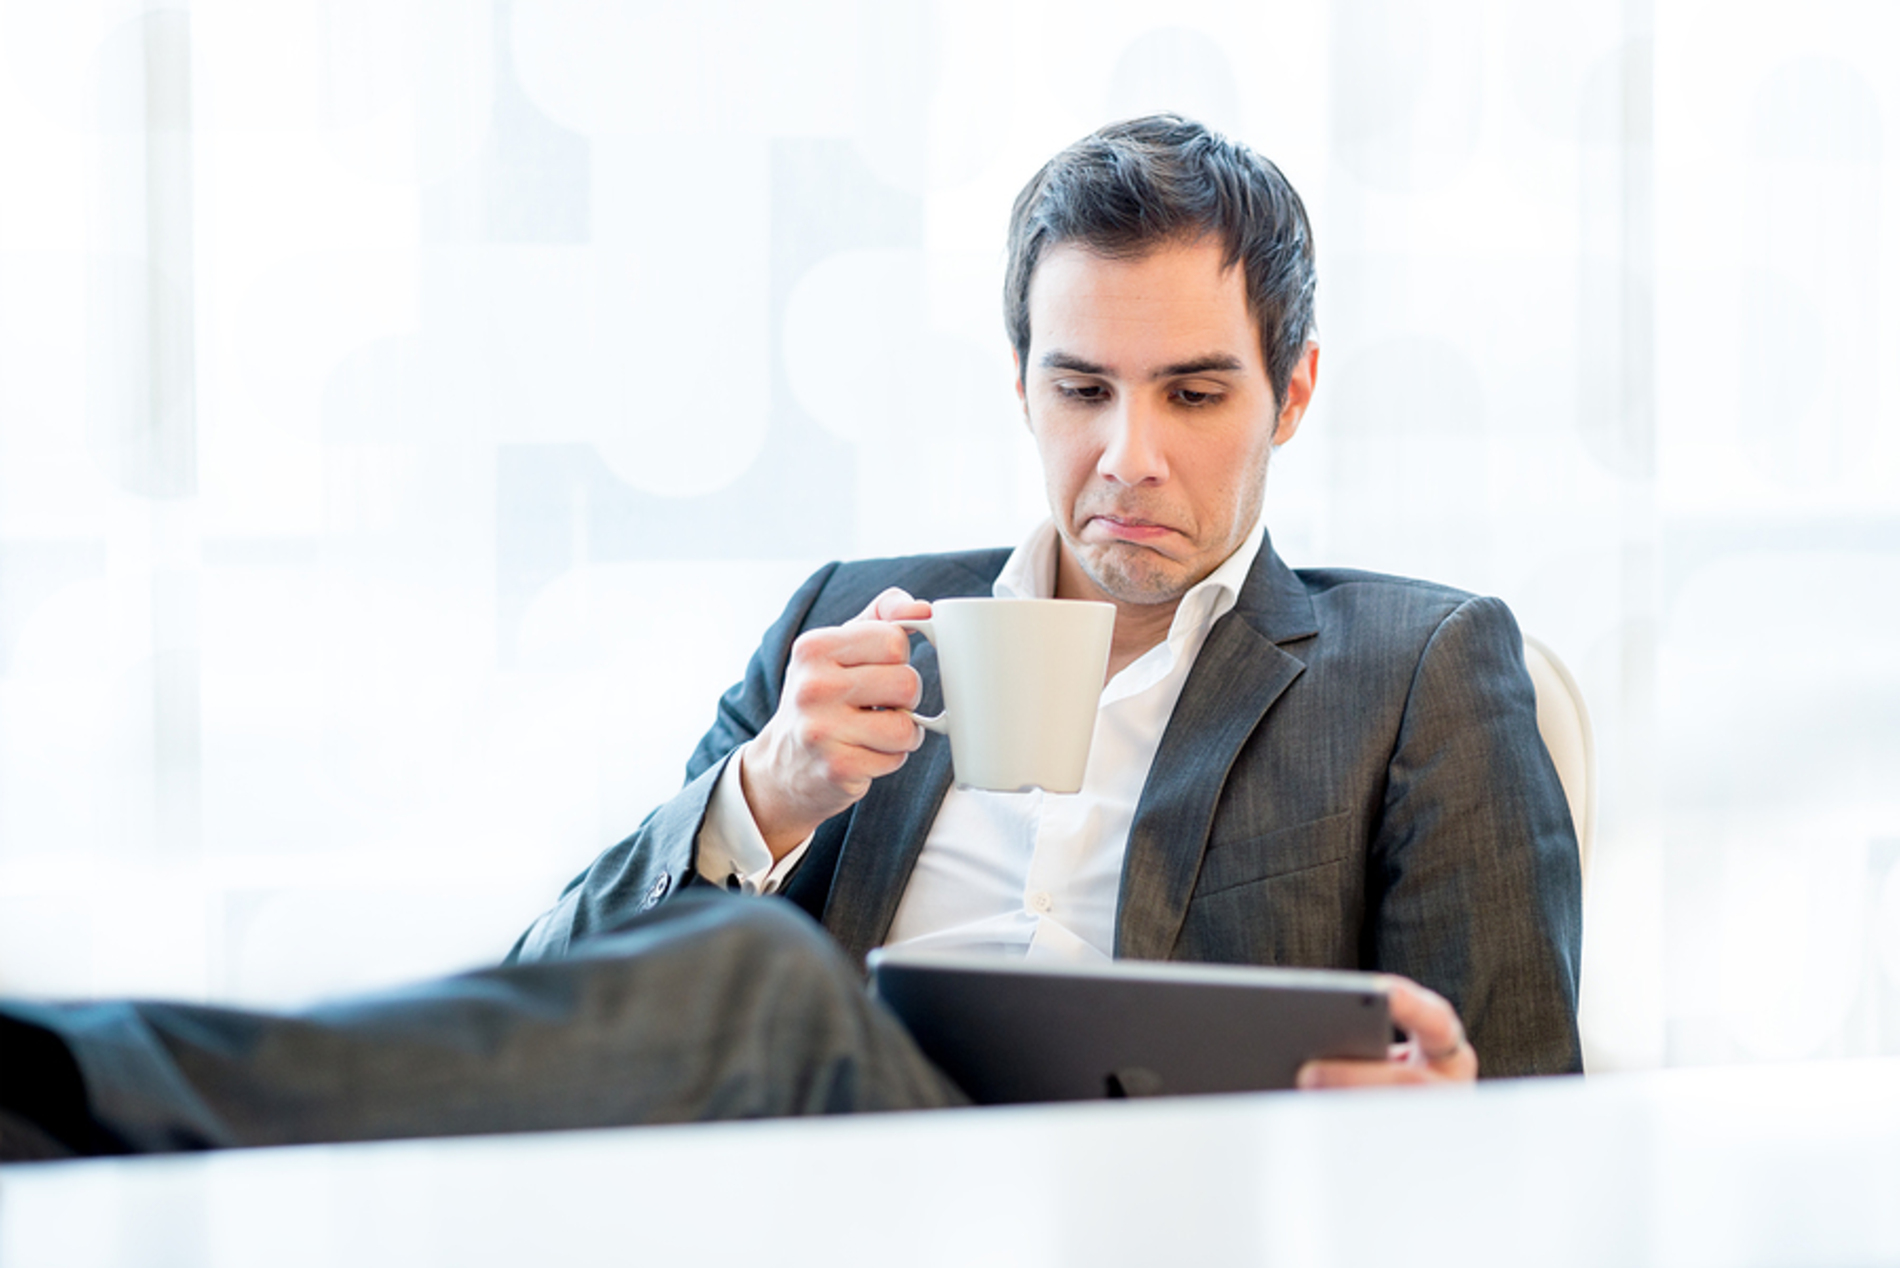 Man looking at his tablet while drinking a coffee.